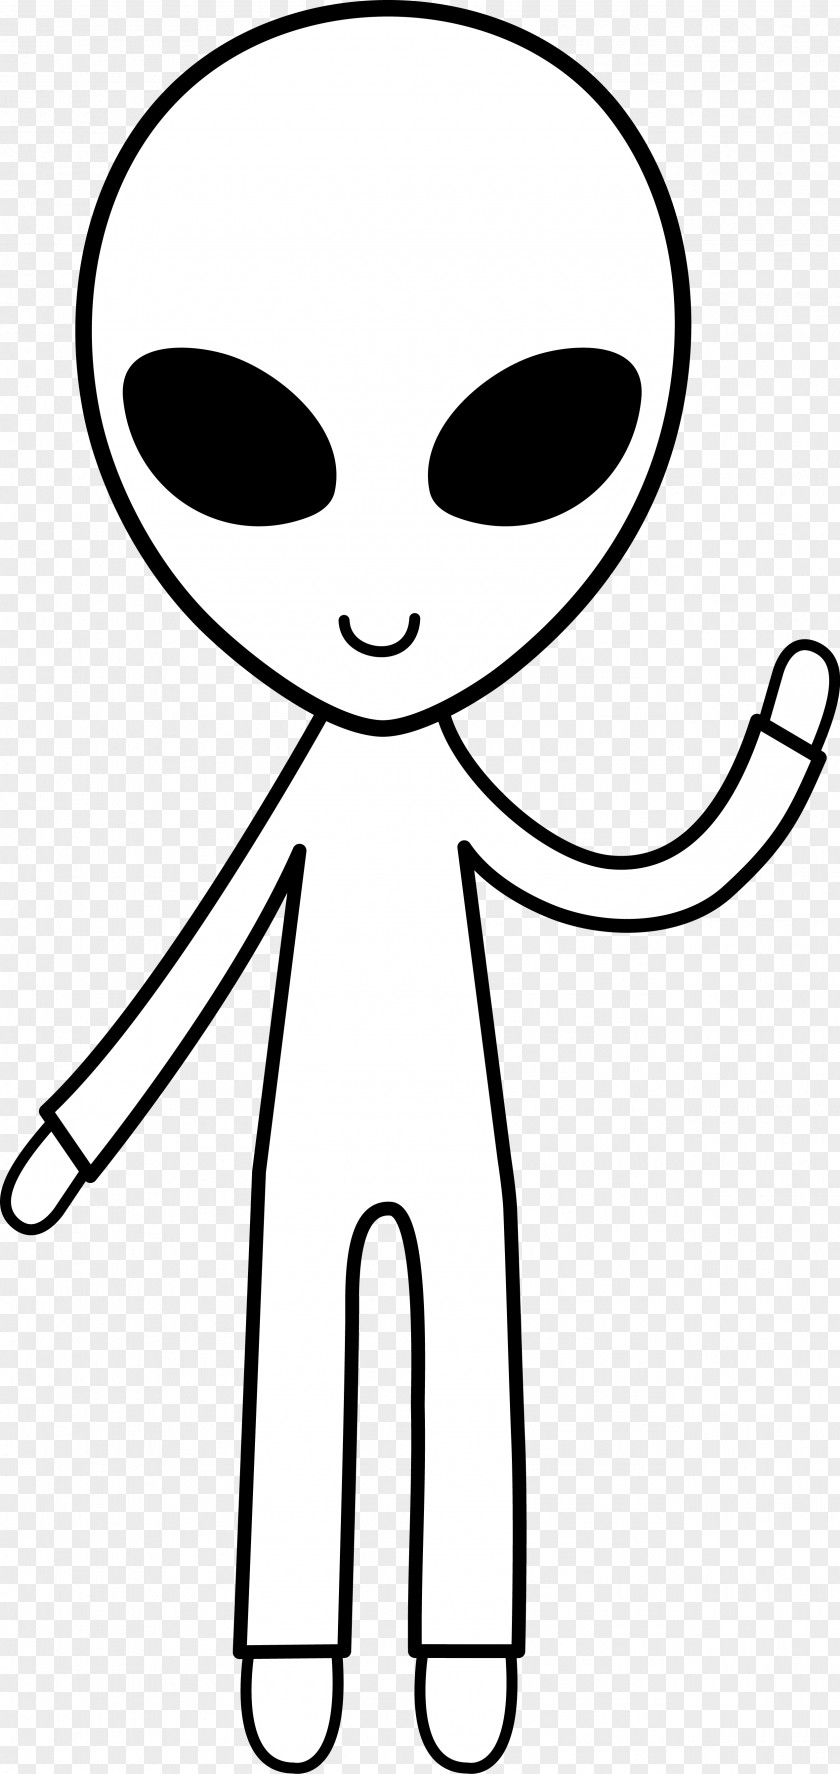 Aliens Cliparts Alien Extraterrestrial Life Black And White Cartoon Clip Art PNG